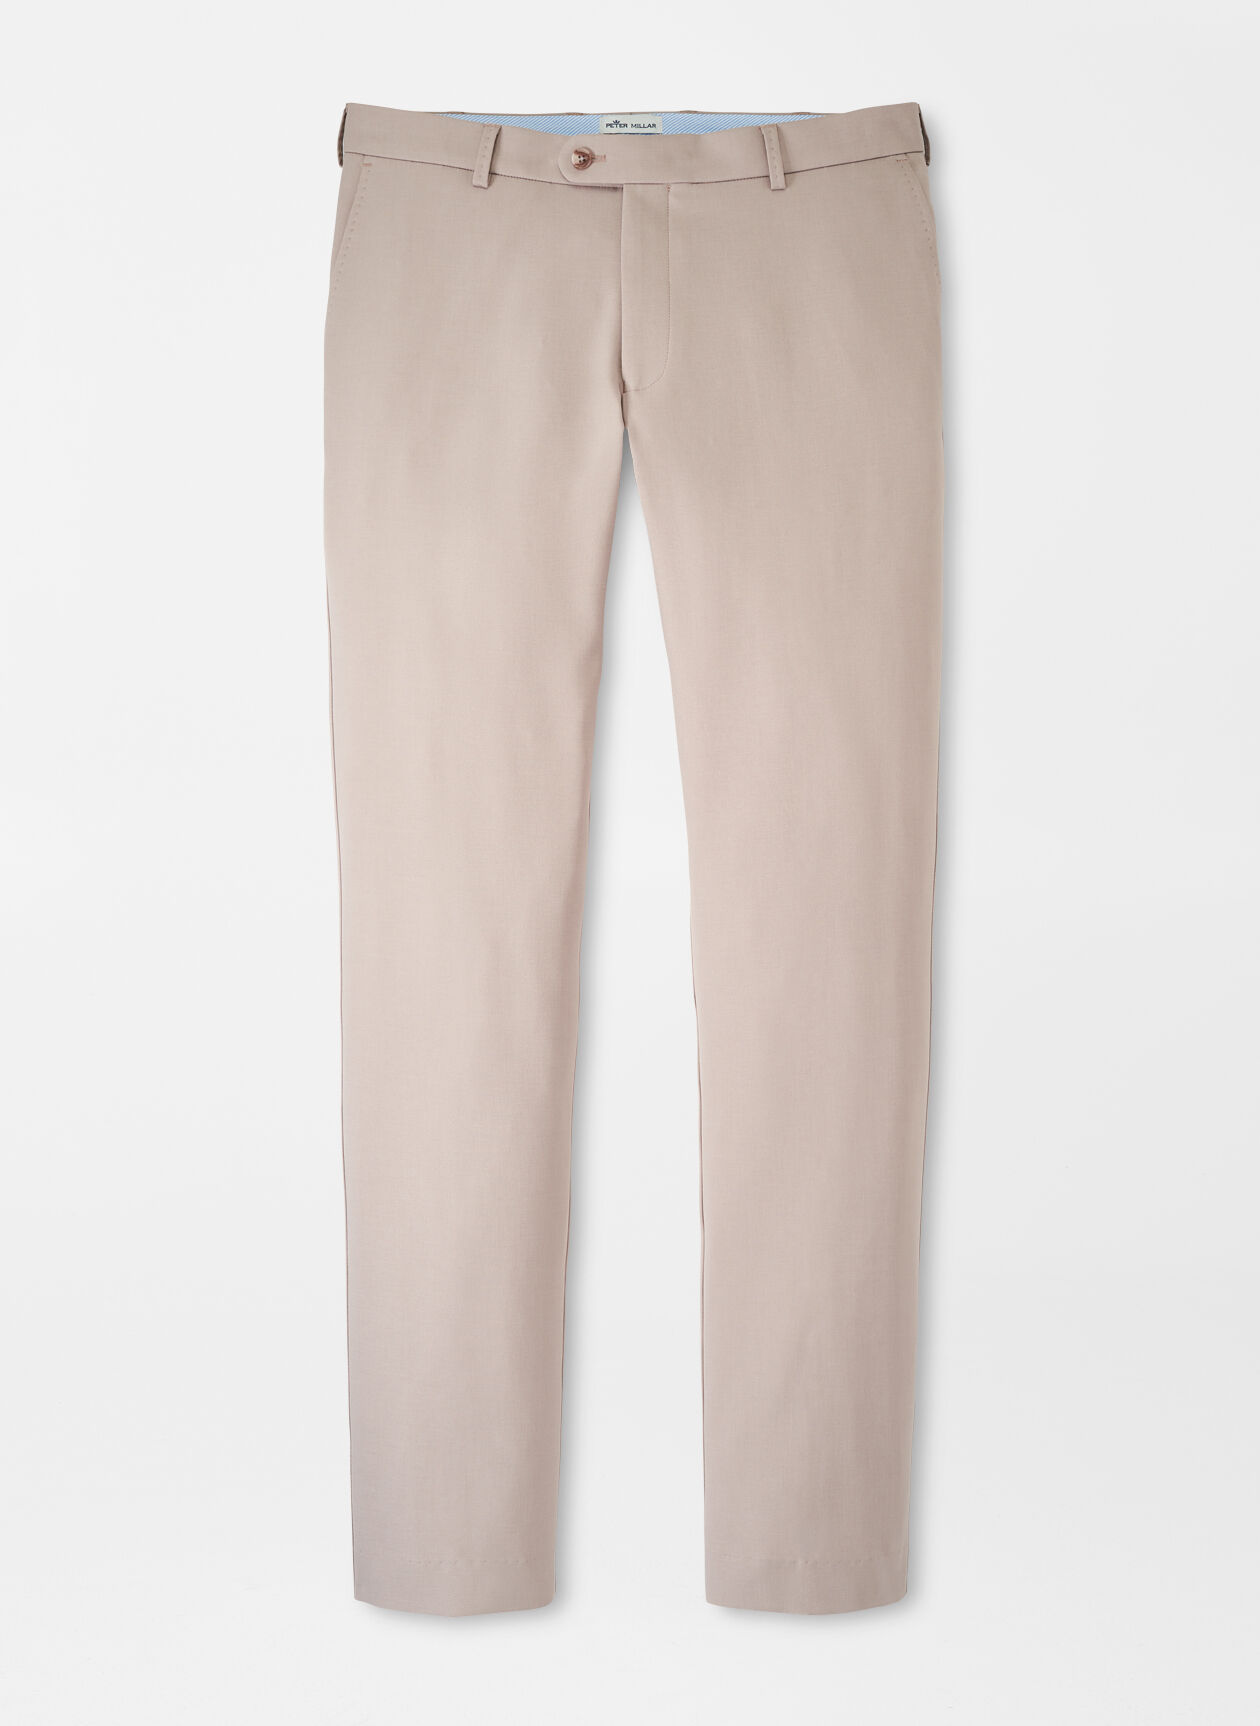 Franklin Performance Trouser in Toasted Almond by Peter Millar - Hansen's  Clothing